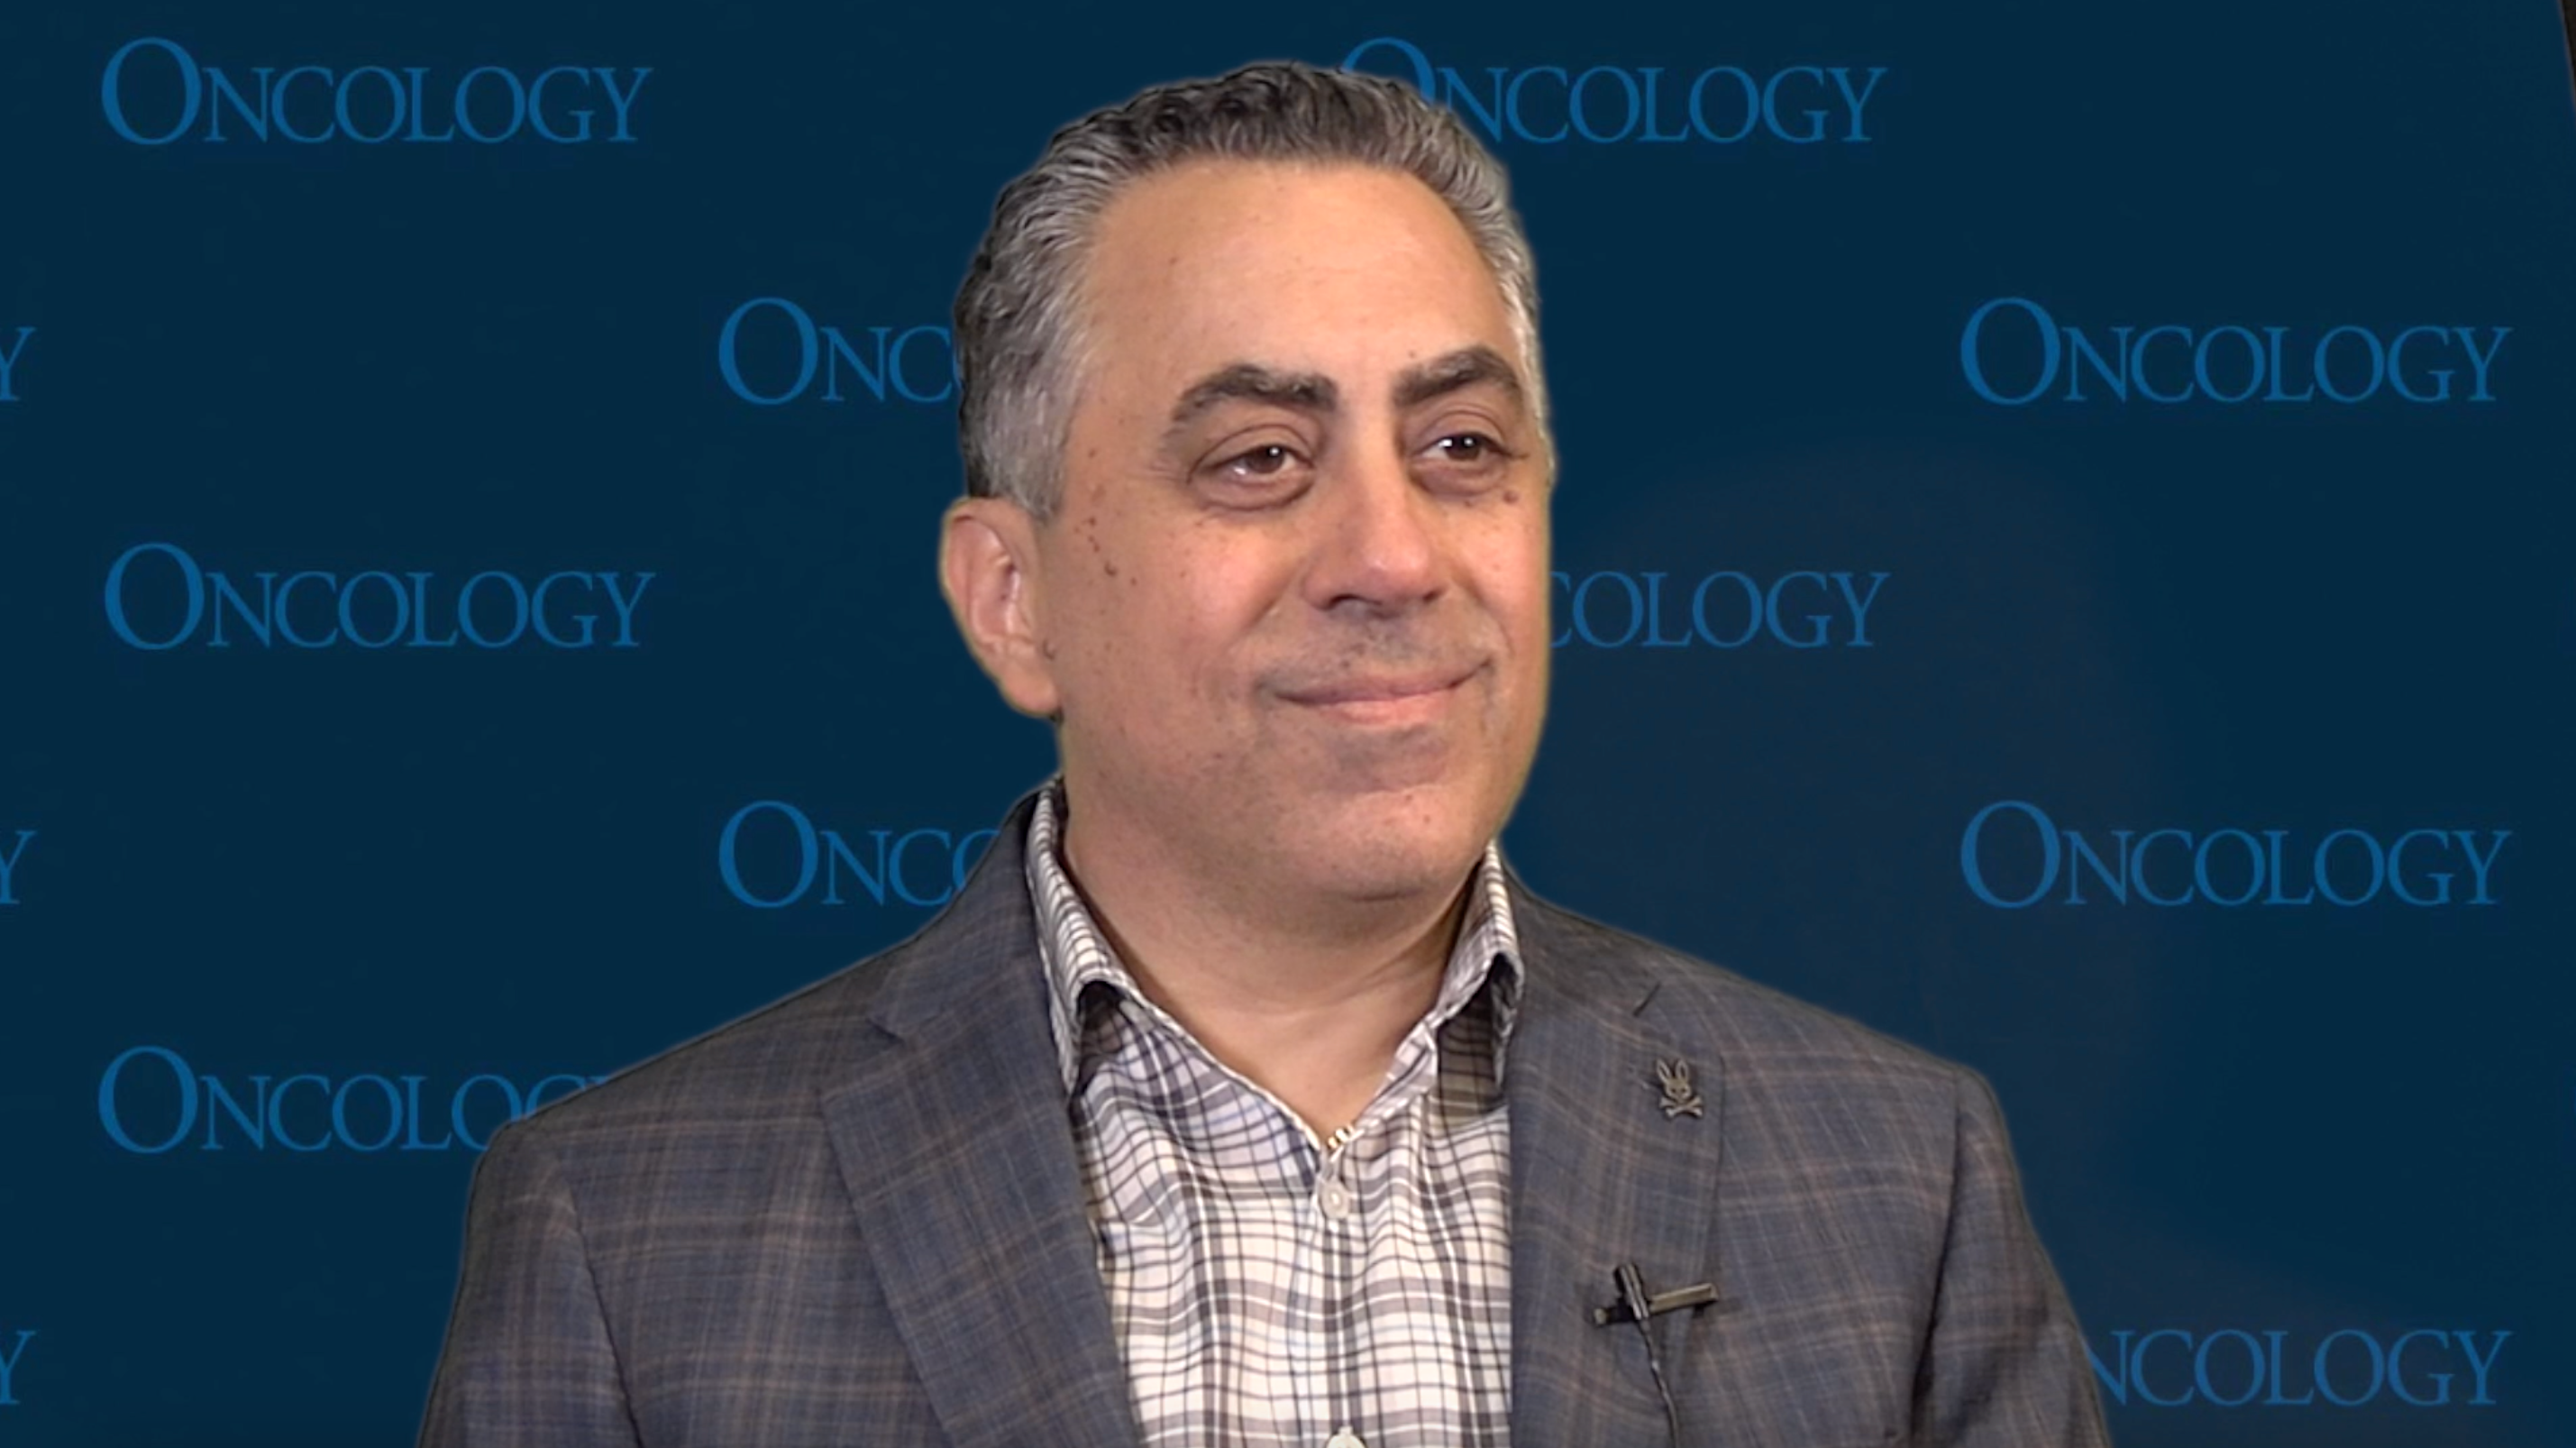 Tanios S. Bekaii-Saab, MD, on Using Assays to Predict Outcomes and Select Adjuvant Therapy in Stage II CRC